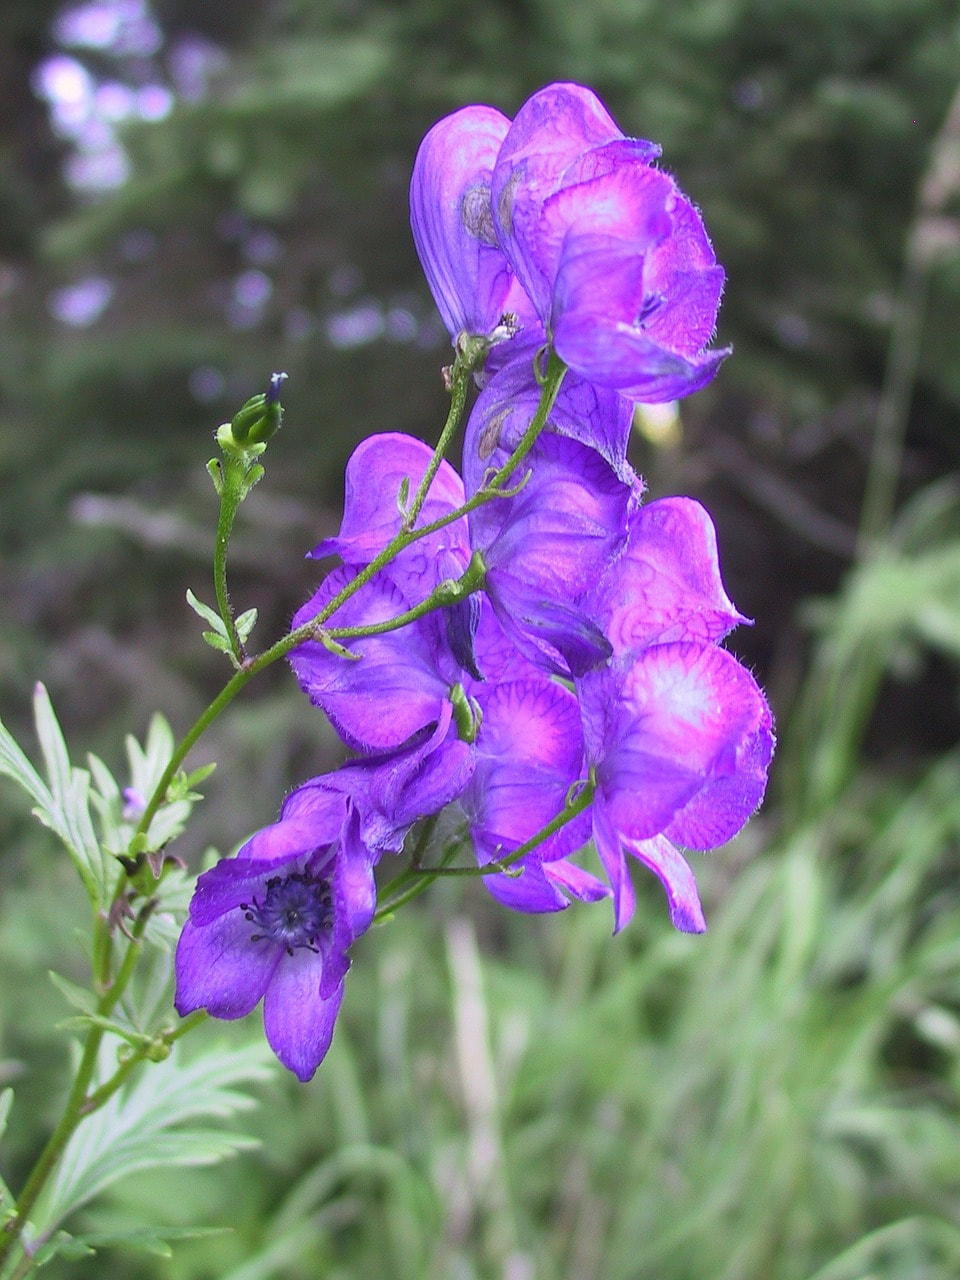 Aconitum napellus, a common homeopathic remedy for shocks